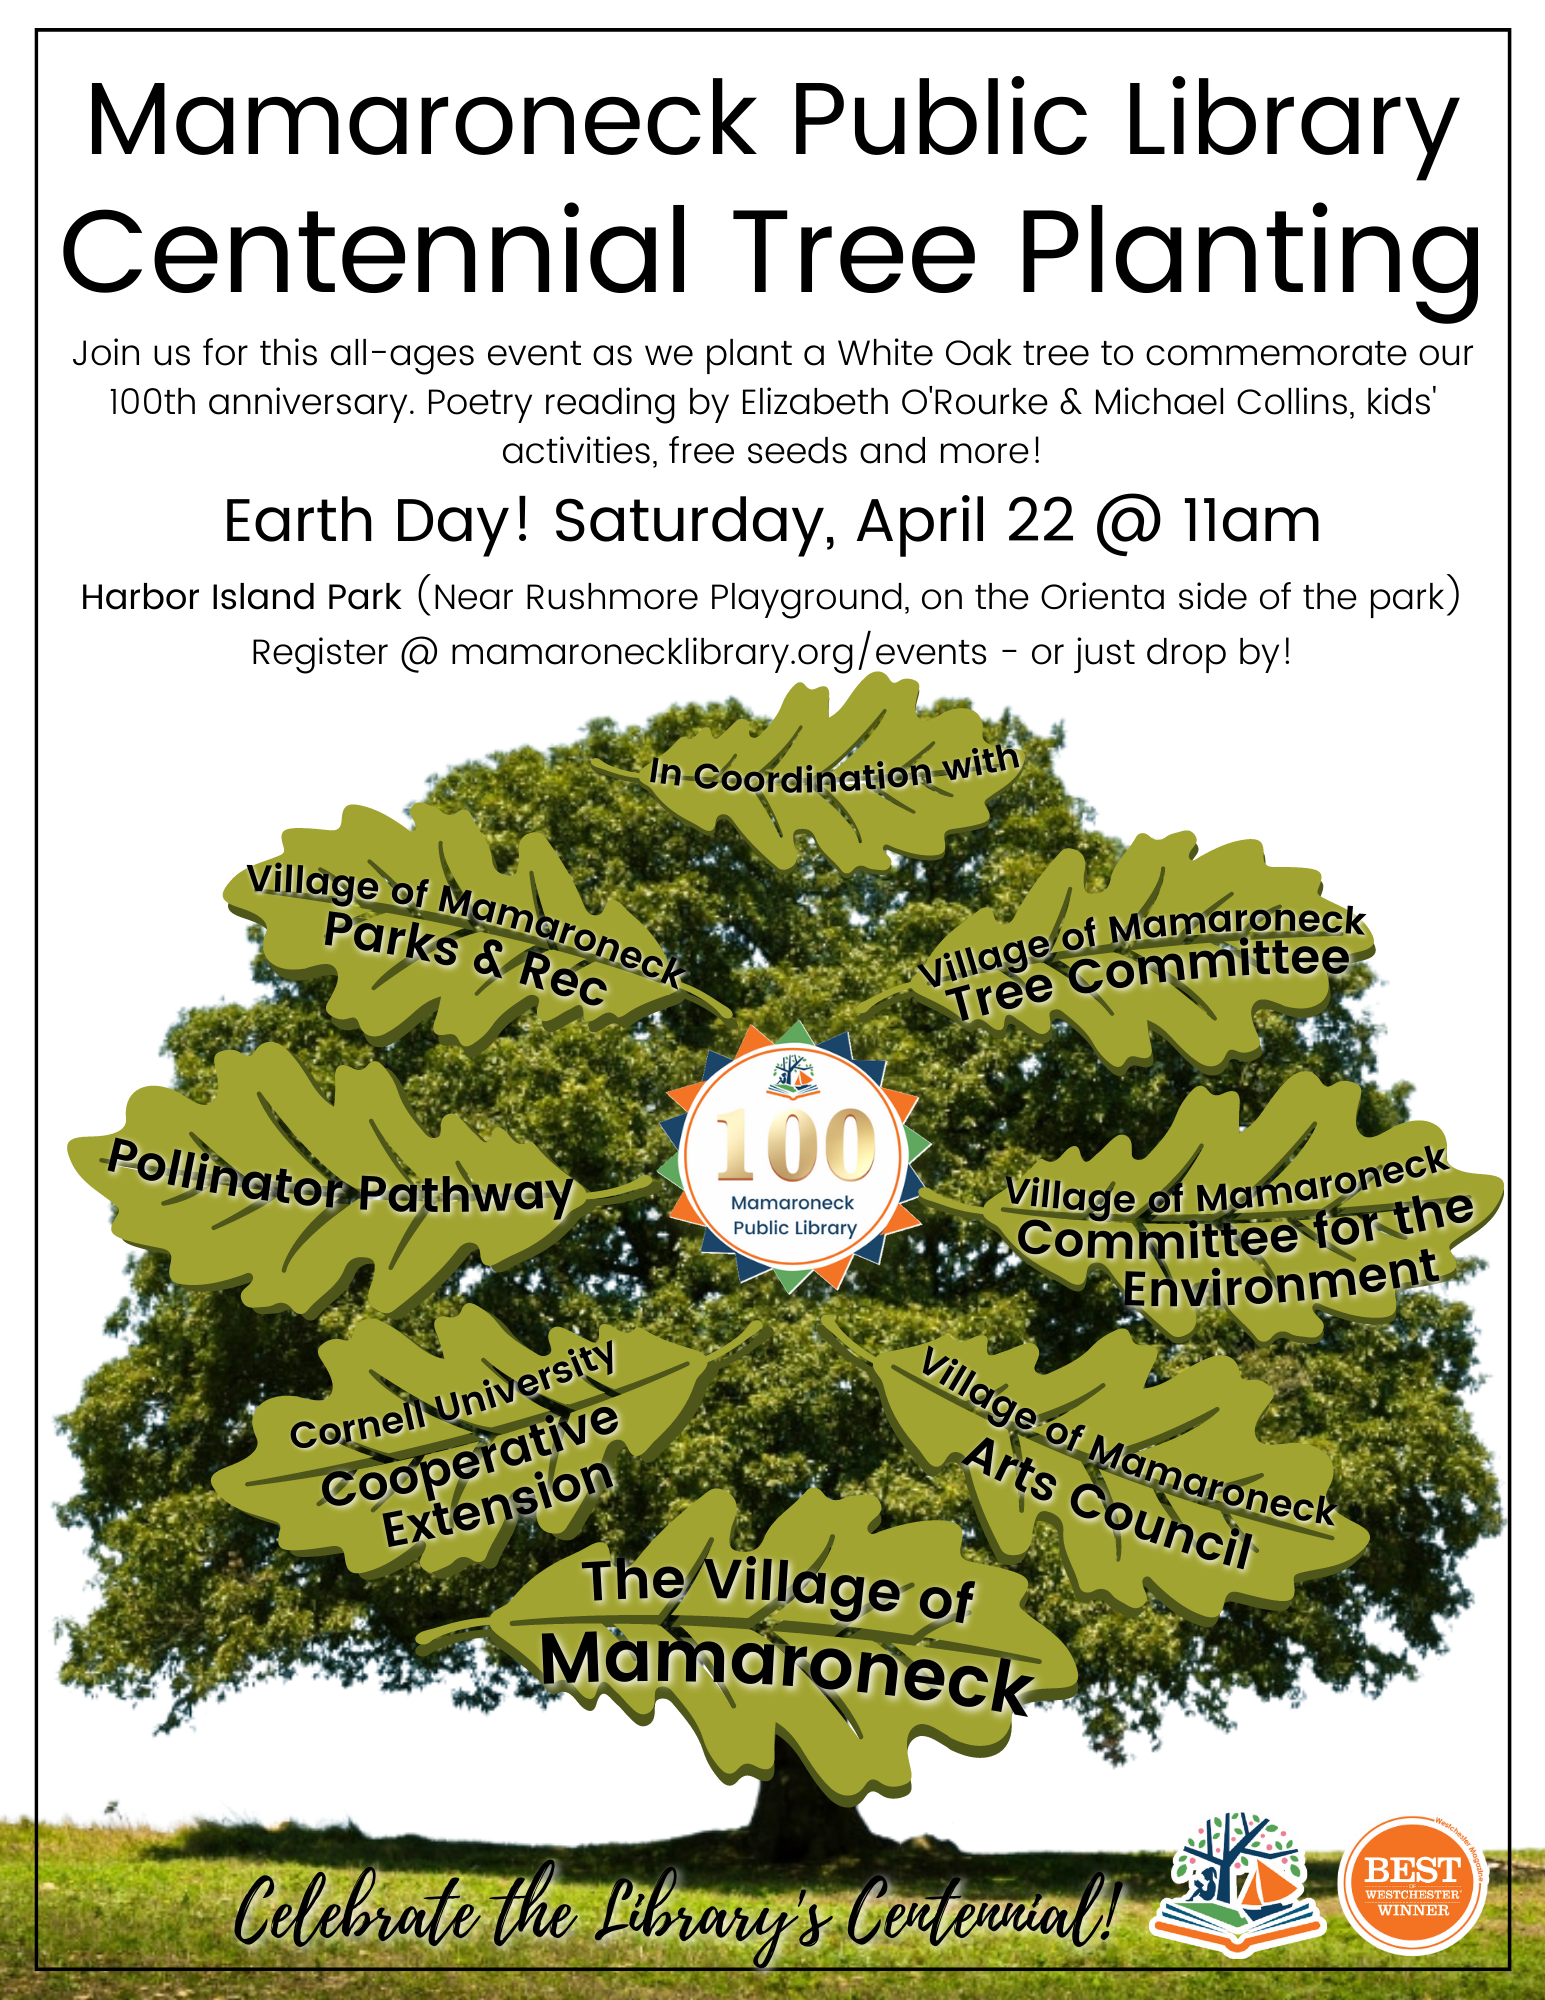 Centennial Tree Planting - Earth Day - April 22 @ 11am